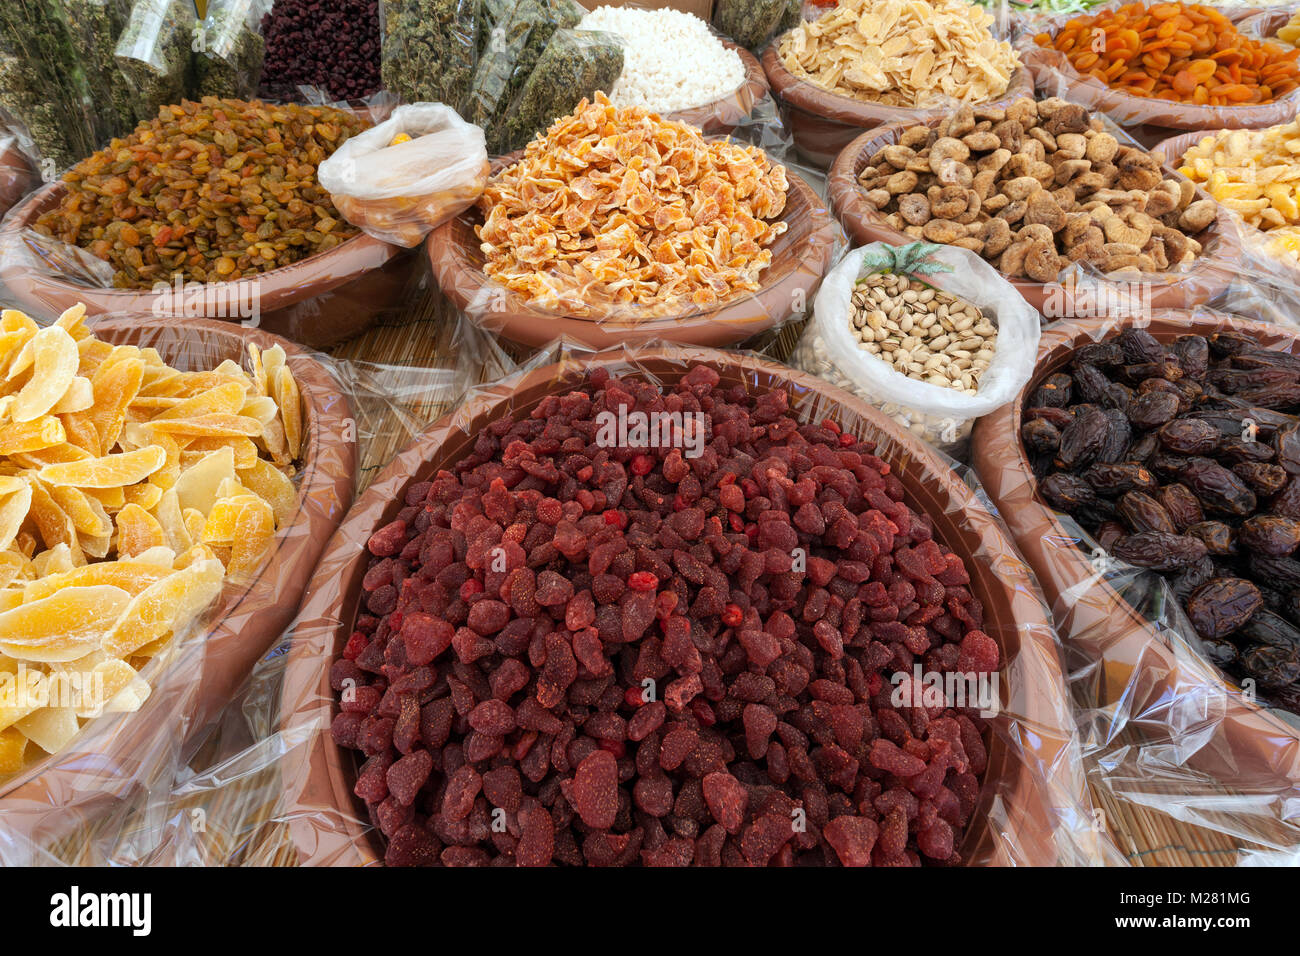 Dried and candied fruits at a market stall in Cannobio, Lago Maggiore, Verbano-Cusio-Ossola province, Piedmont region, Italy Stock Photo